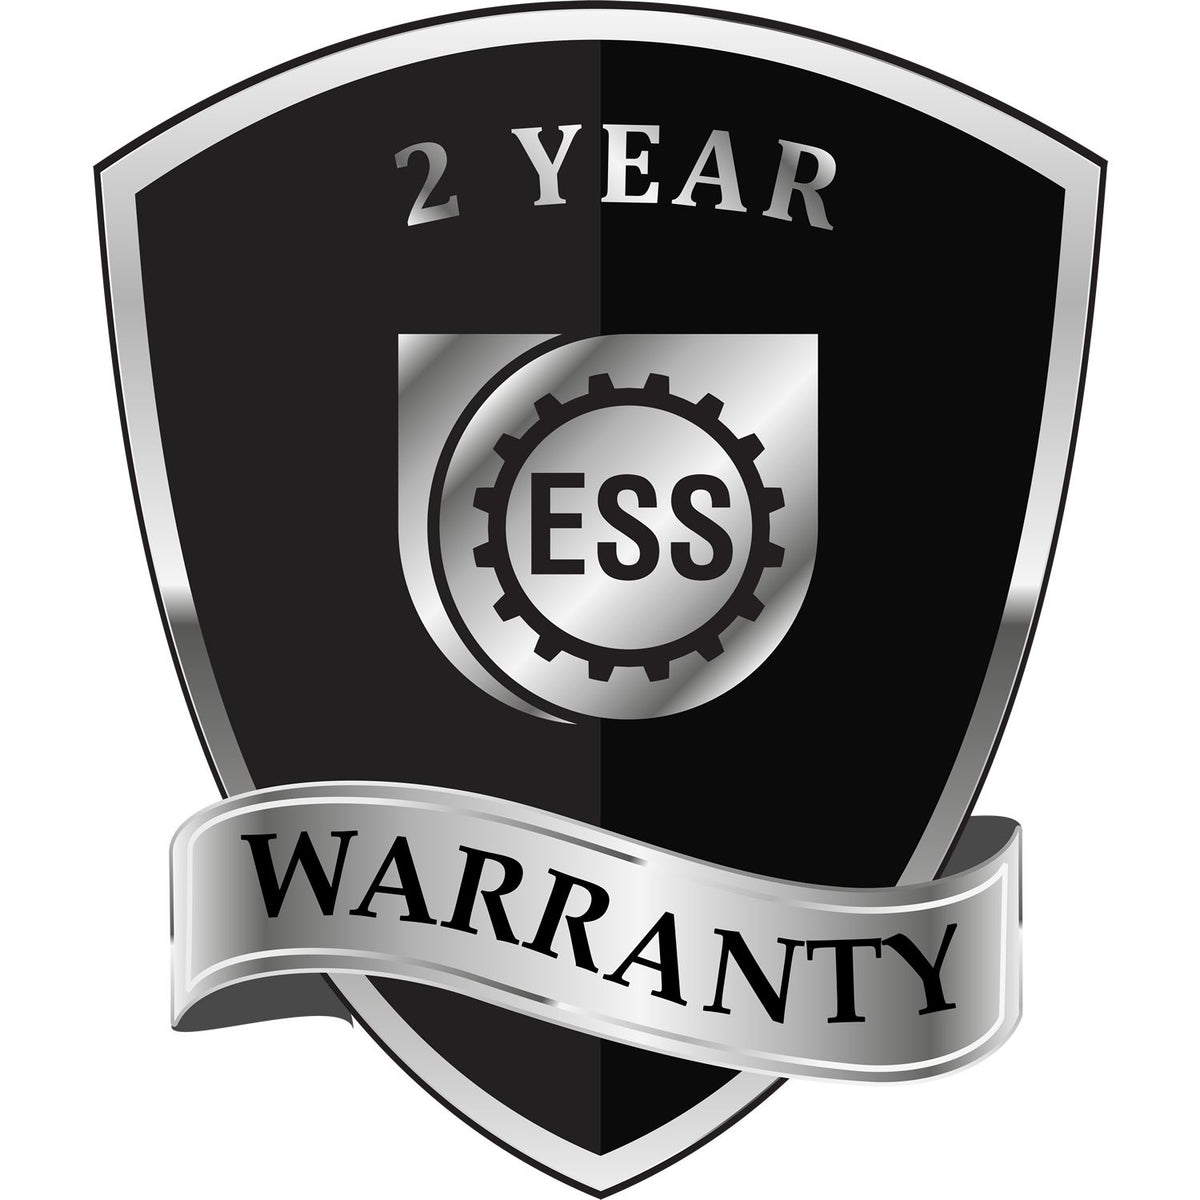 A badge or emblem showing a warranty icon for the Heavy Duty Cast Iron Louisiana Engineer Seal Embosser